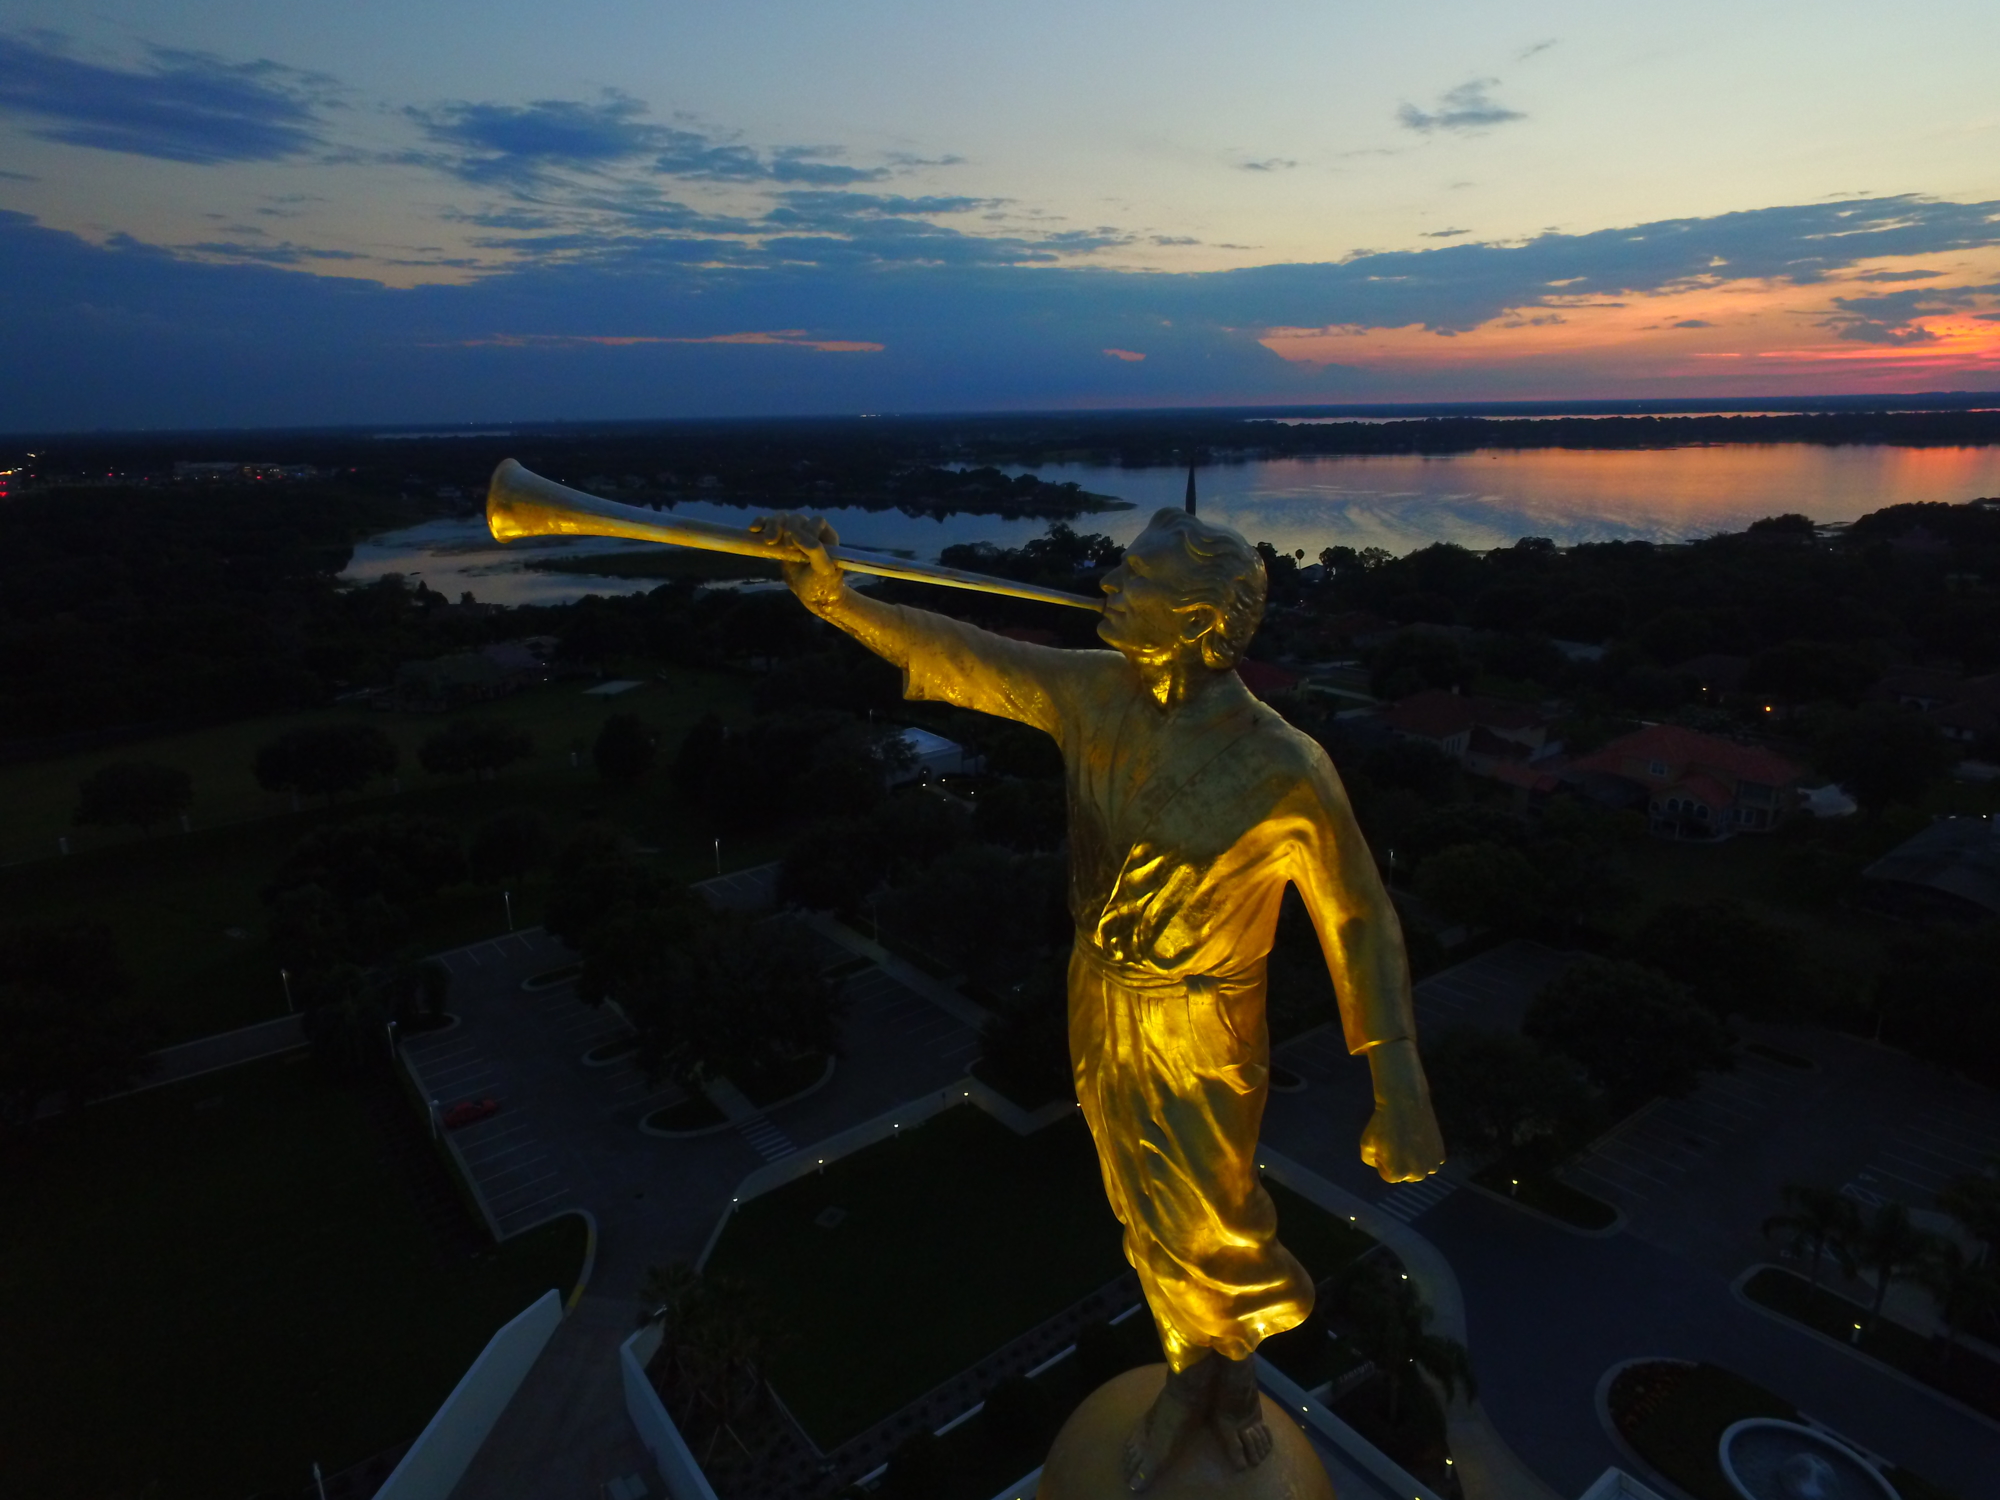 Comstock used his drone to get a close look at the Angel Moroni at The Church of Jesus Christ of Latter-day Saints at 9000 Windy Ridge Road in Windermere.